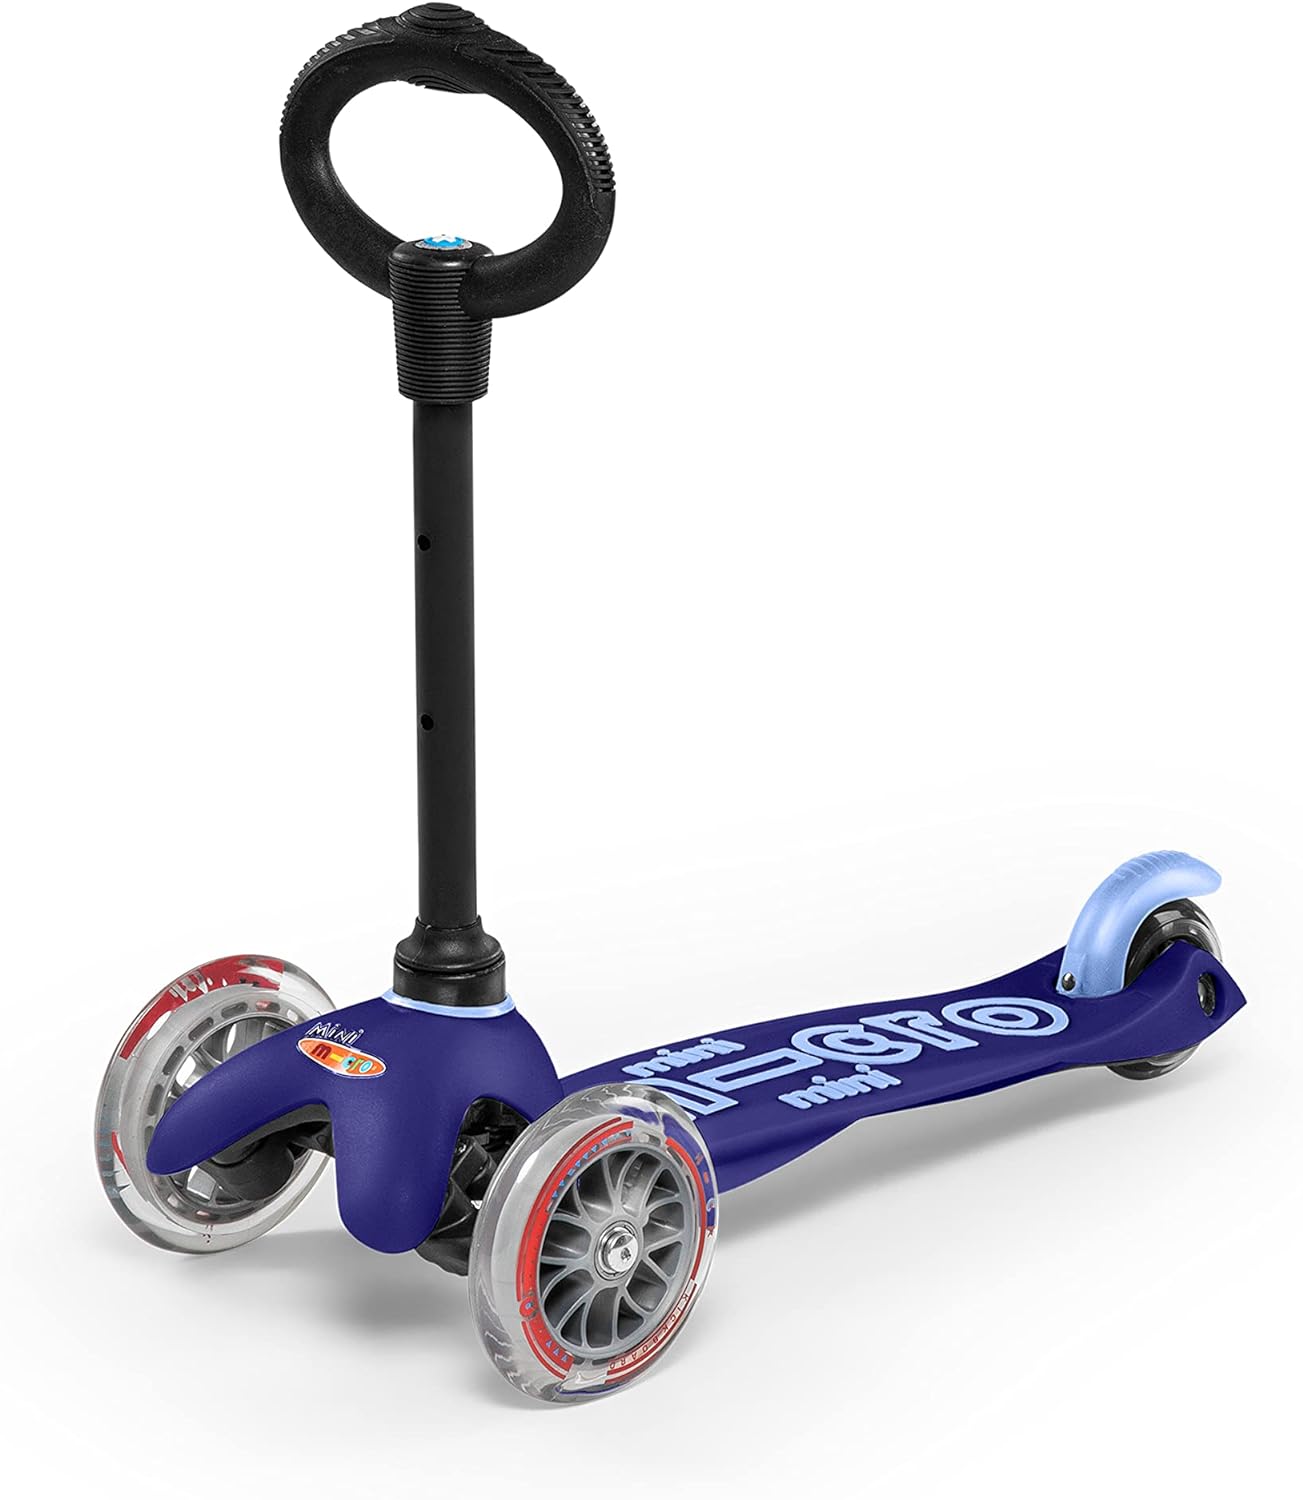 Micro Kickboard - Mini 3in1 Deluxe: The Perfect Ride-on Scooter for Toddlers